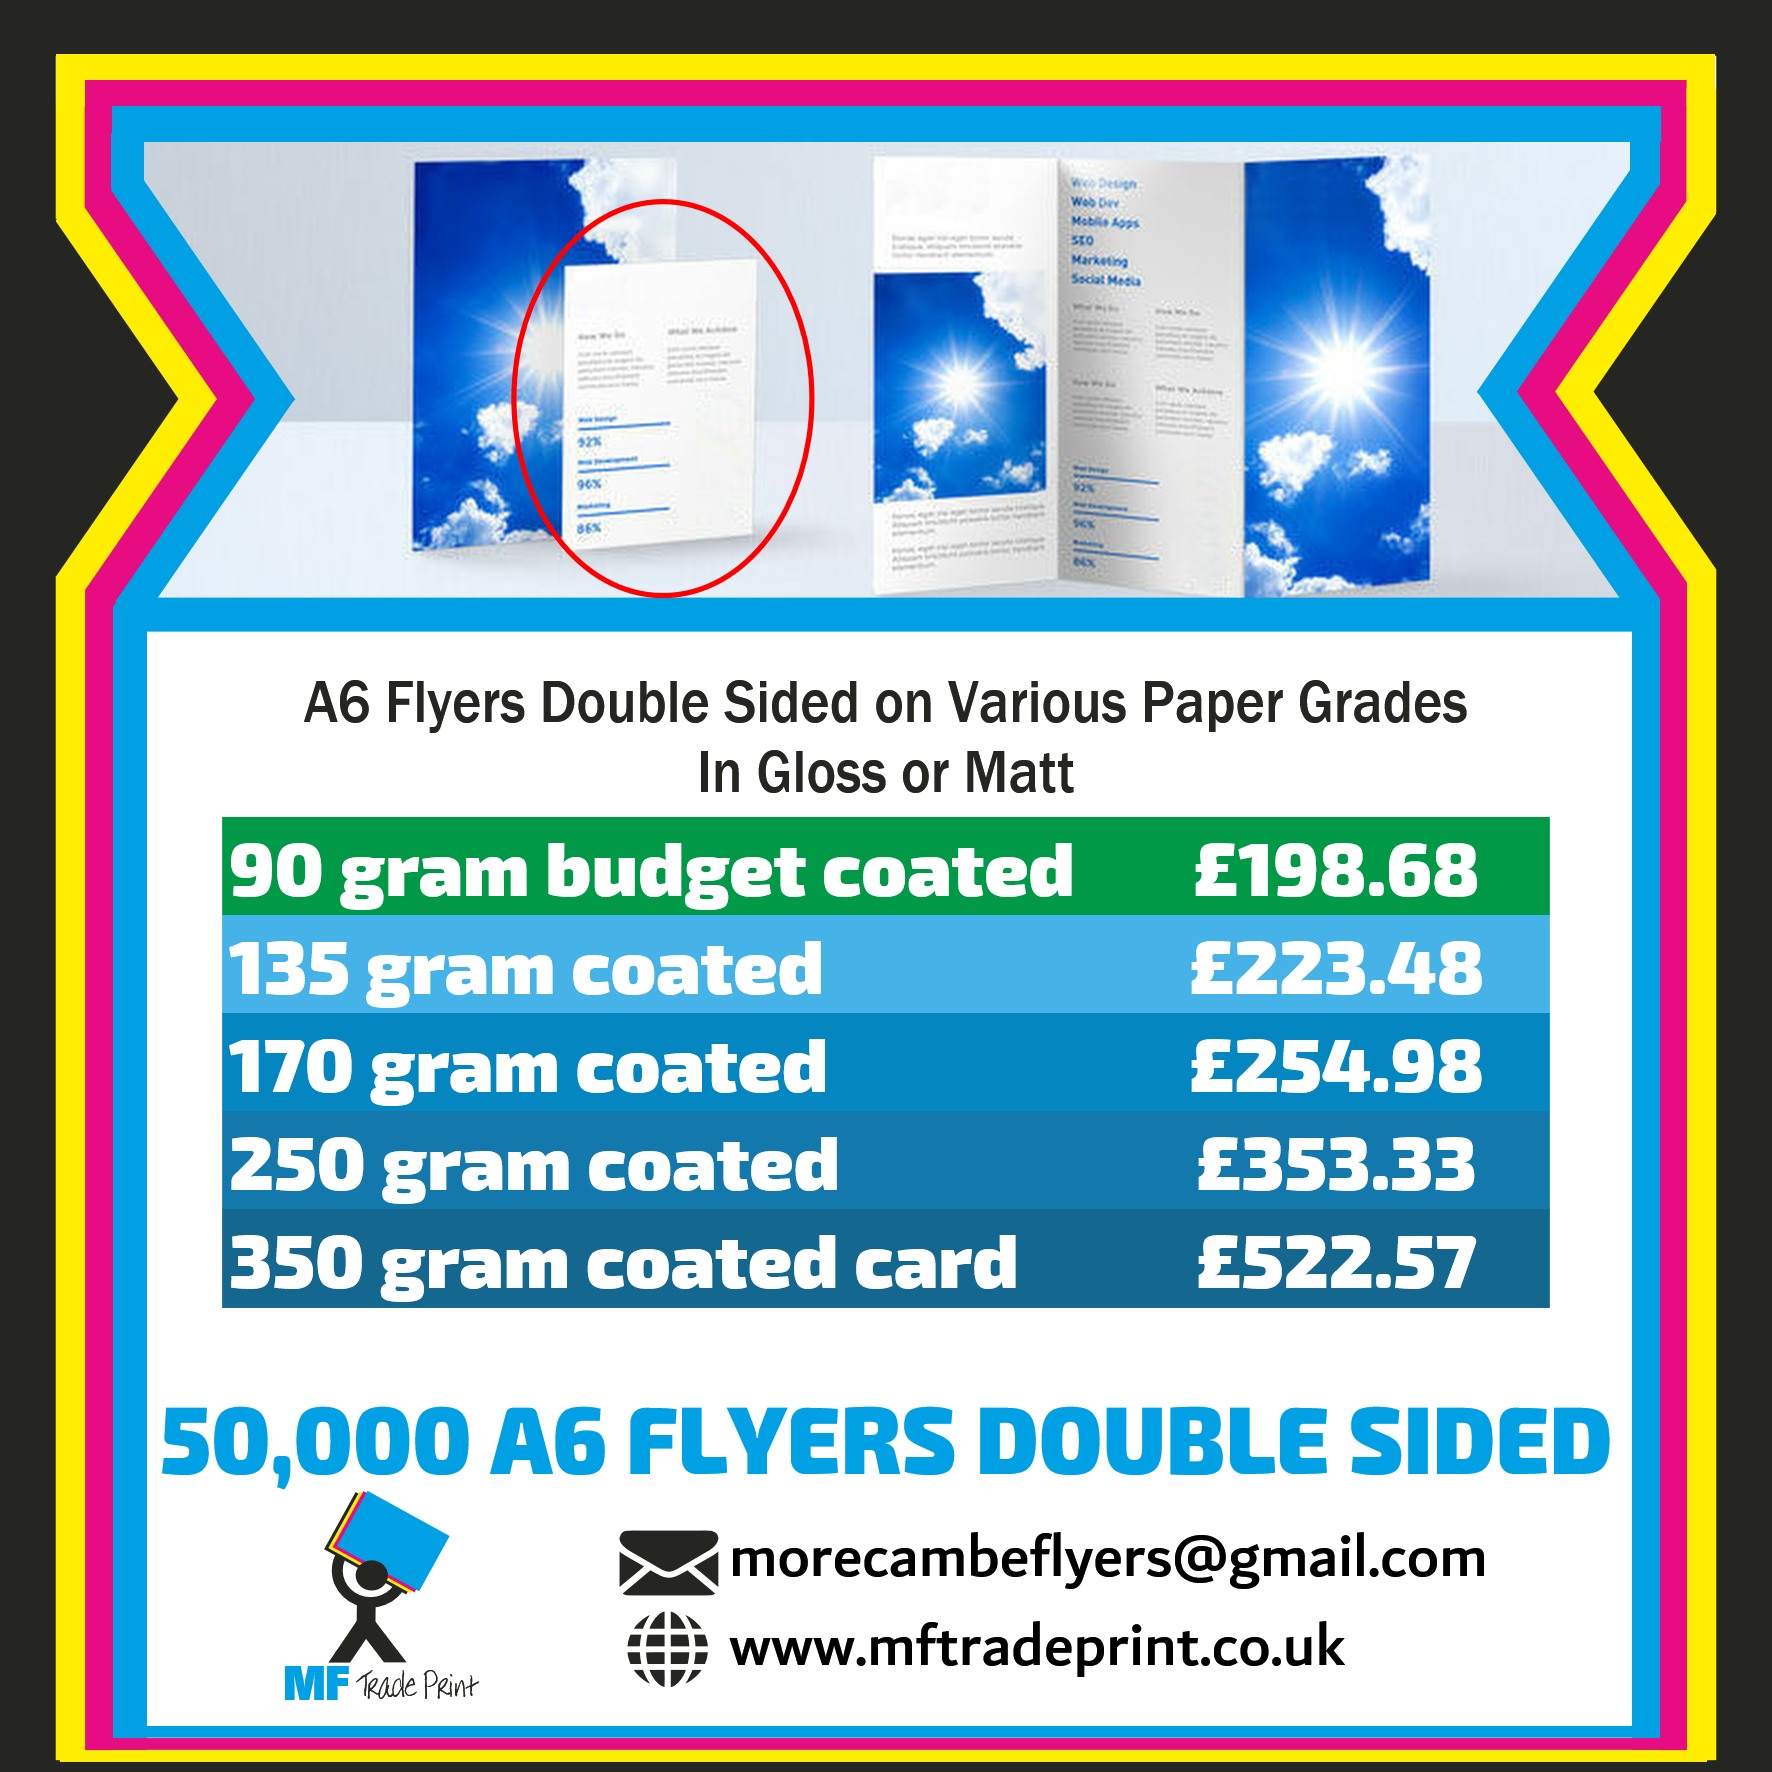 50,000 A6 flyers double sided on various paper grades 00